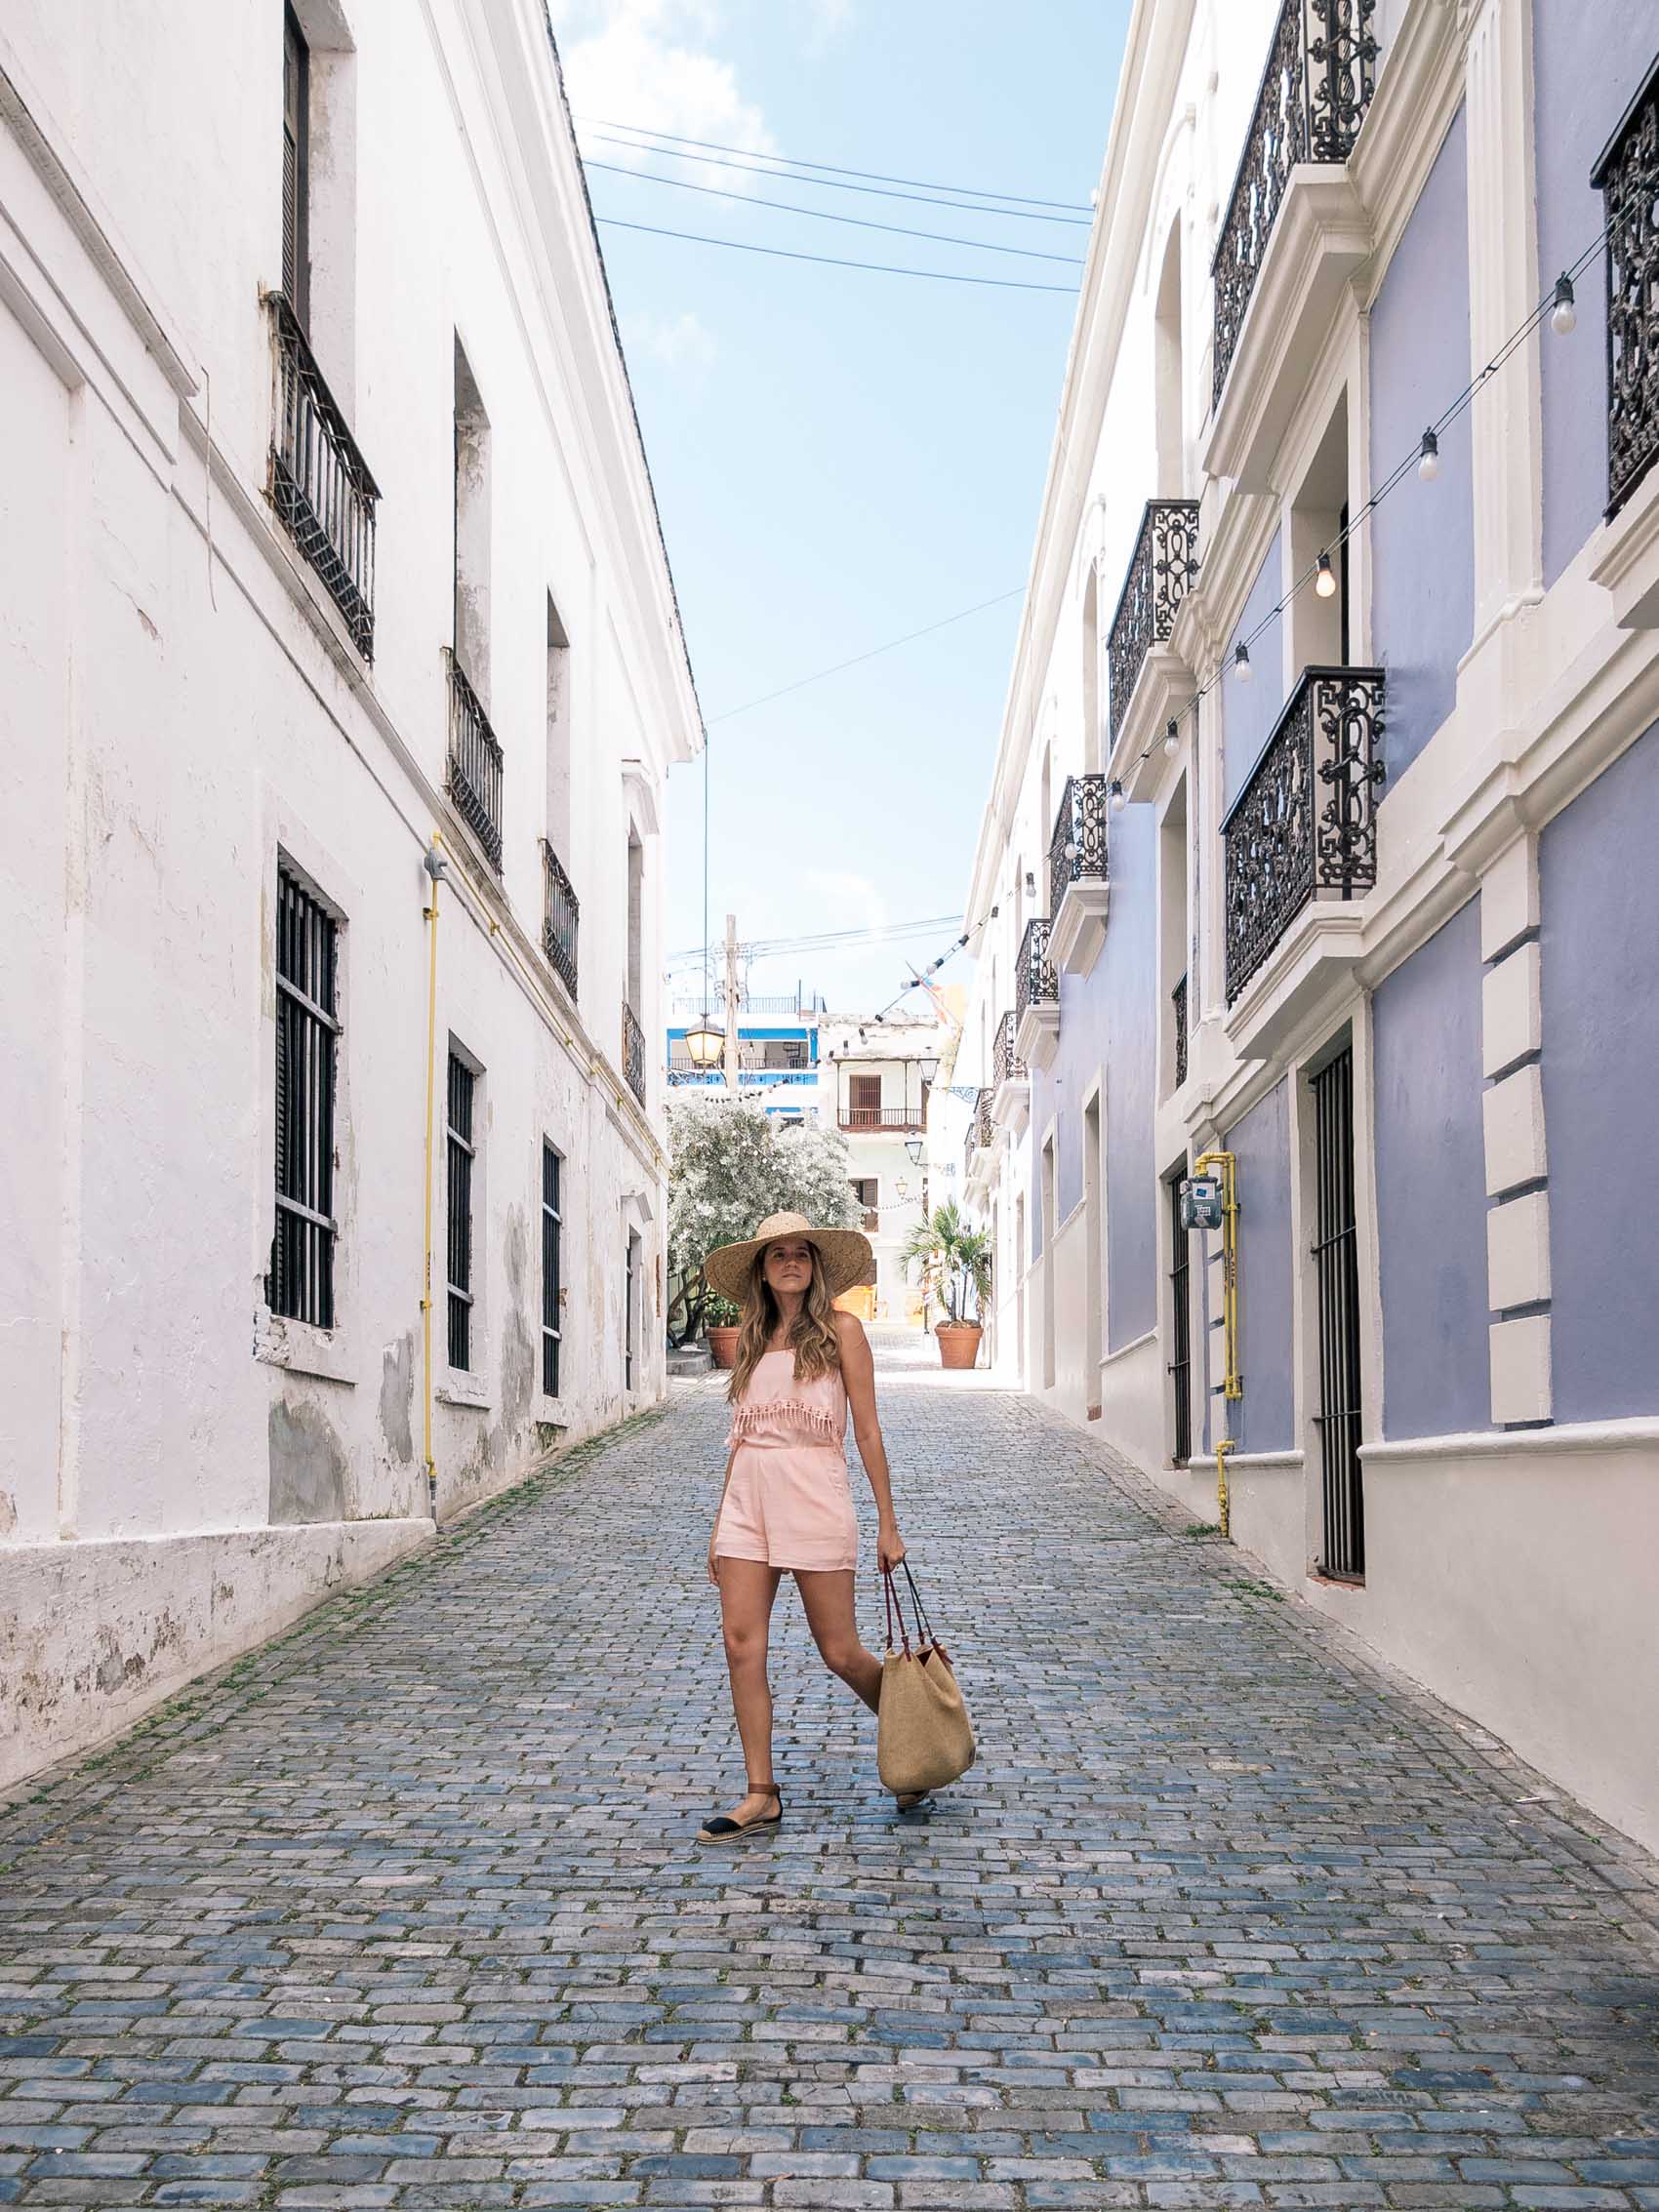 Cobblestone streets and colonial architecture of Old San Juan in Puerto Rico